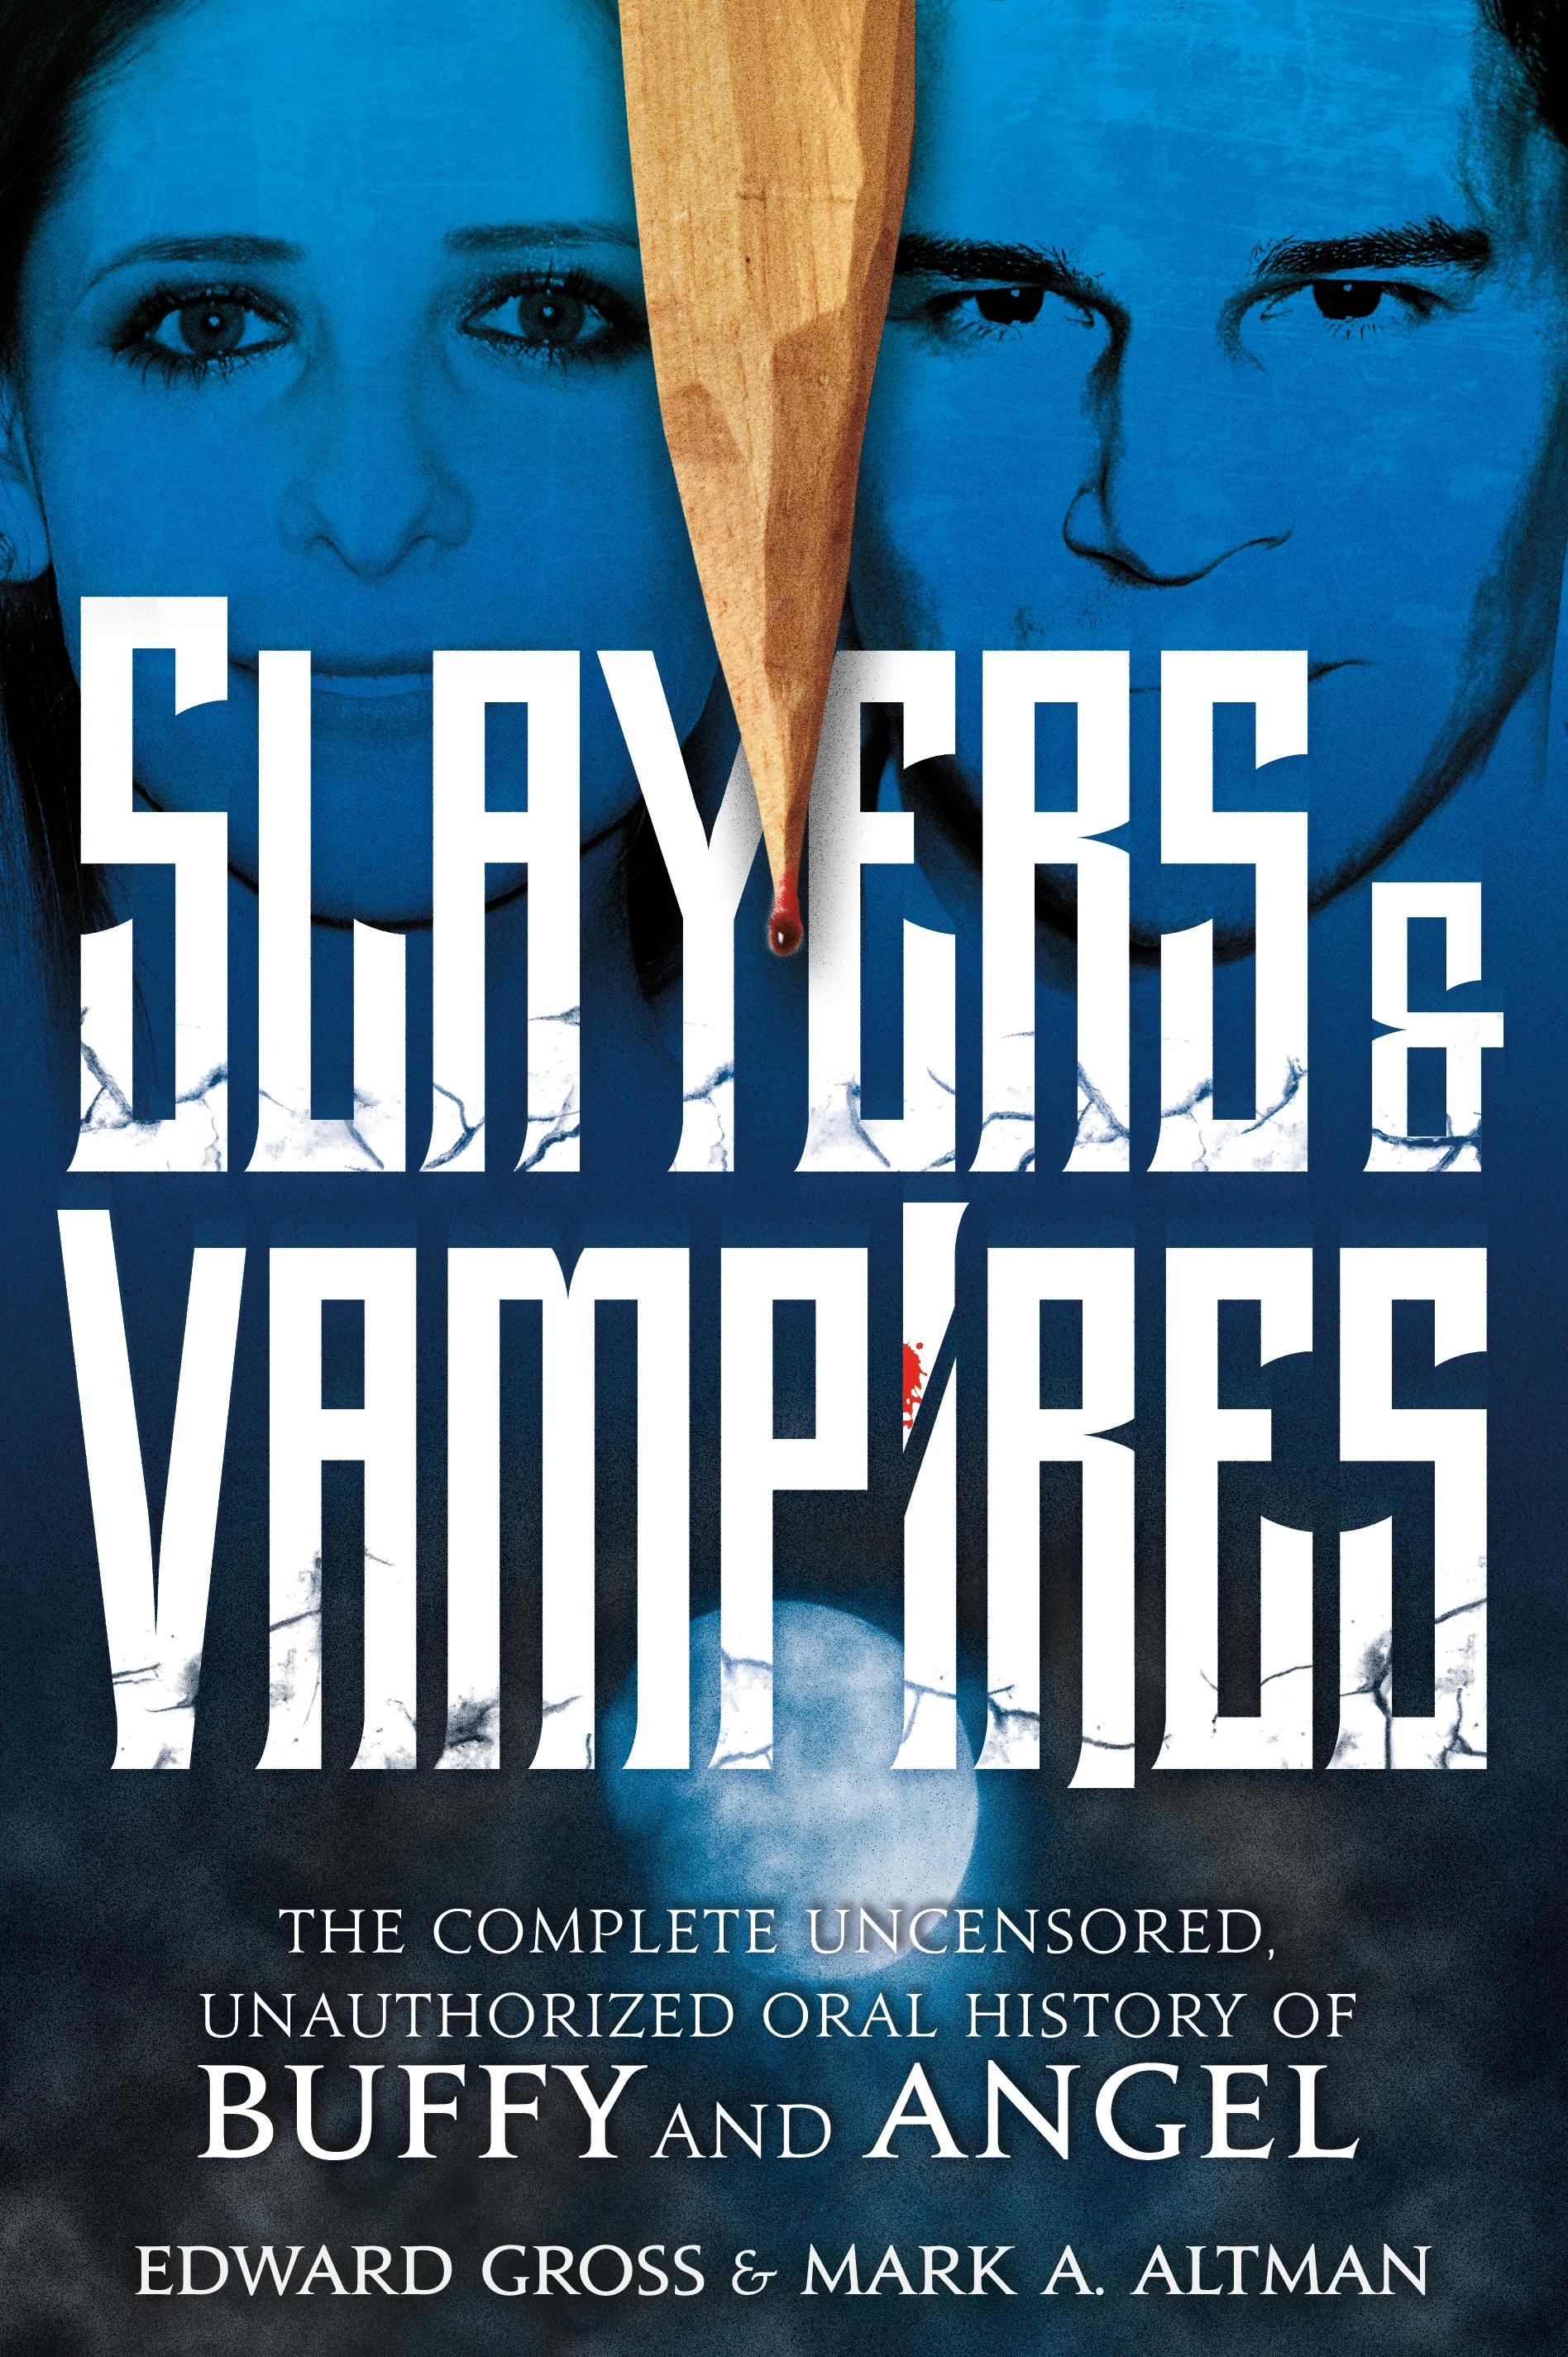 Cover for the book titled as: Slayers & Vampires: The Complete Uncensored, Unauthorized Oral History of Buffy & Angel